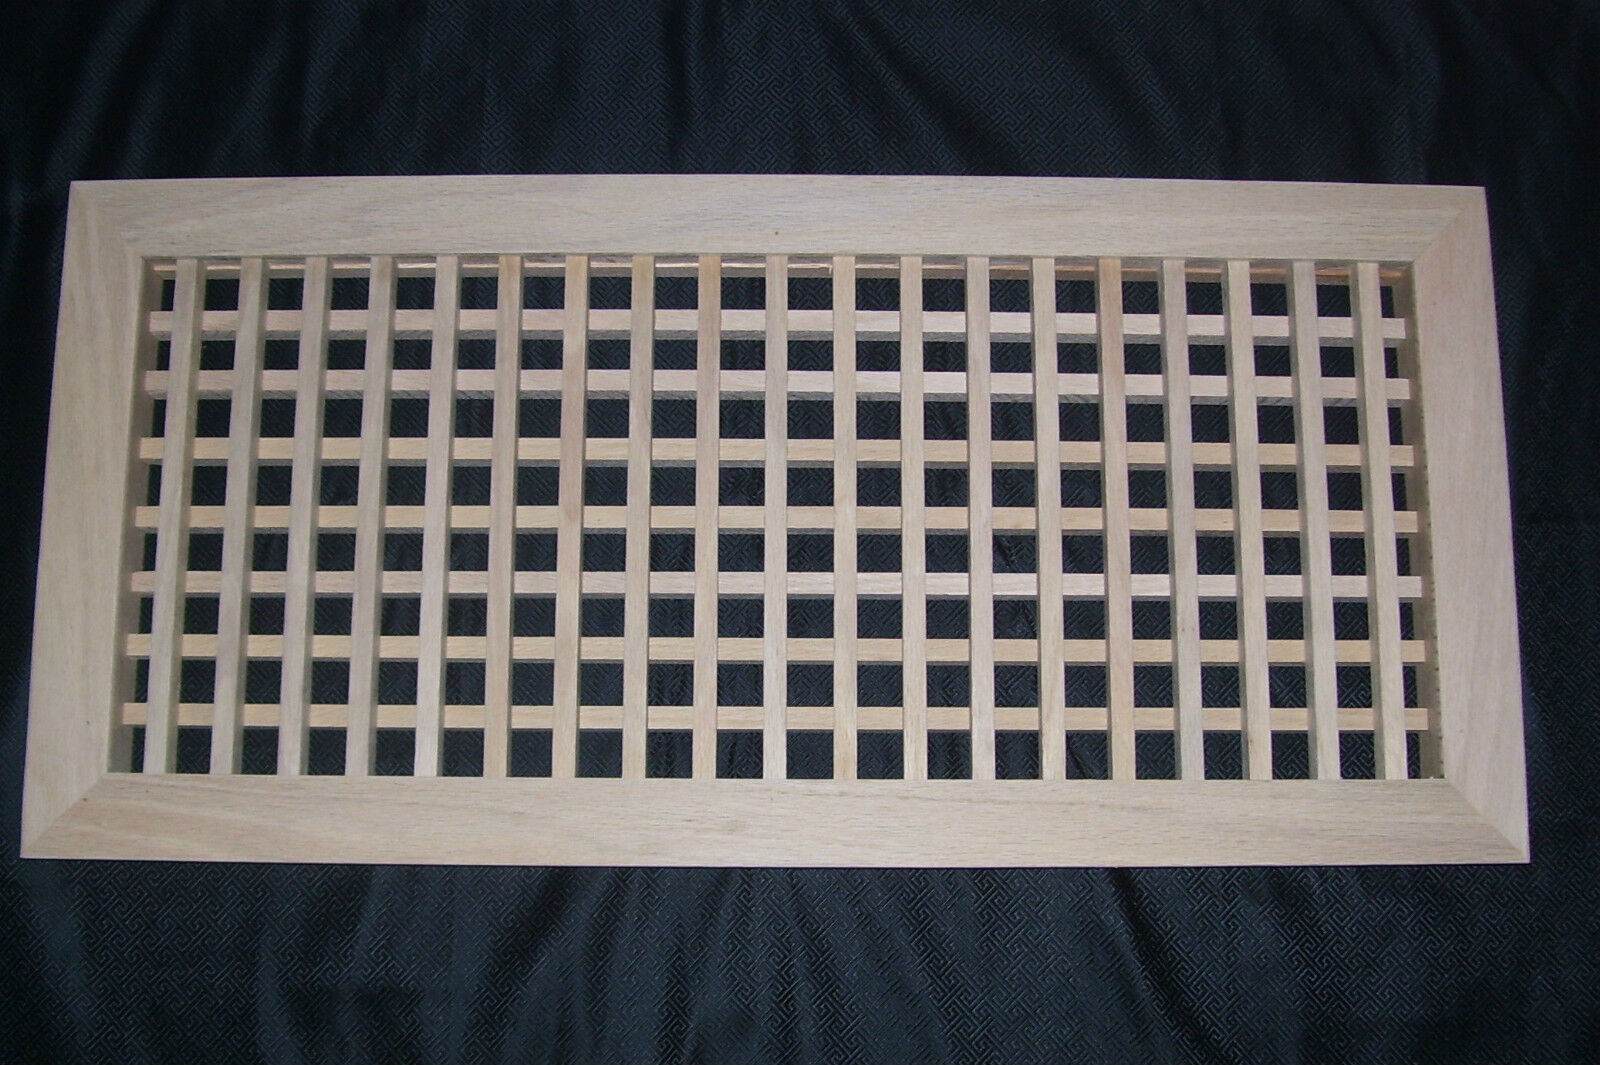  CUSTOM MADE TO YOUR SIZE WOOD FLOOR GRATE WALL REGISTER FLOOR VENT 